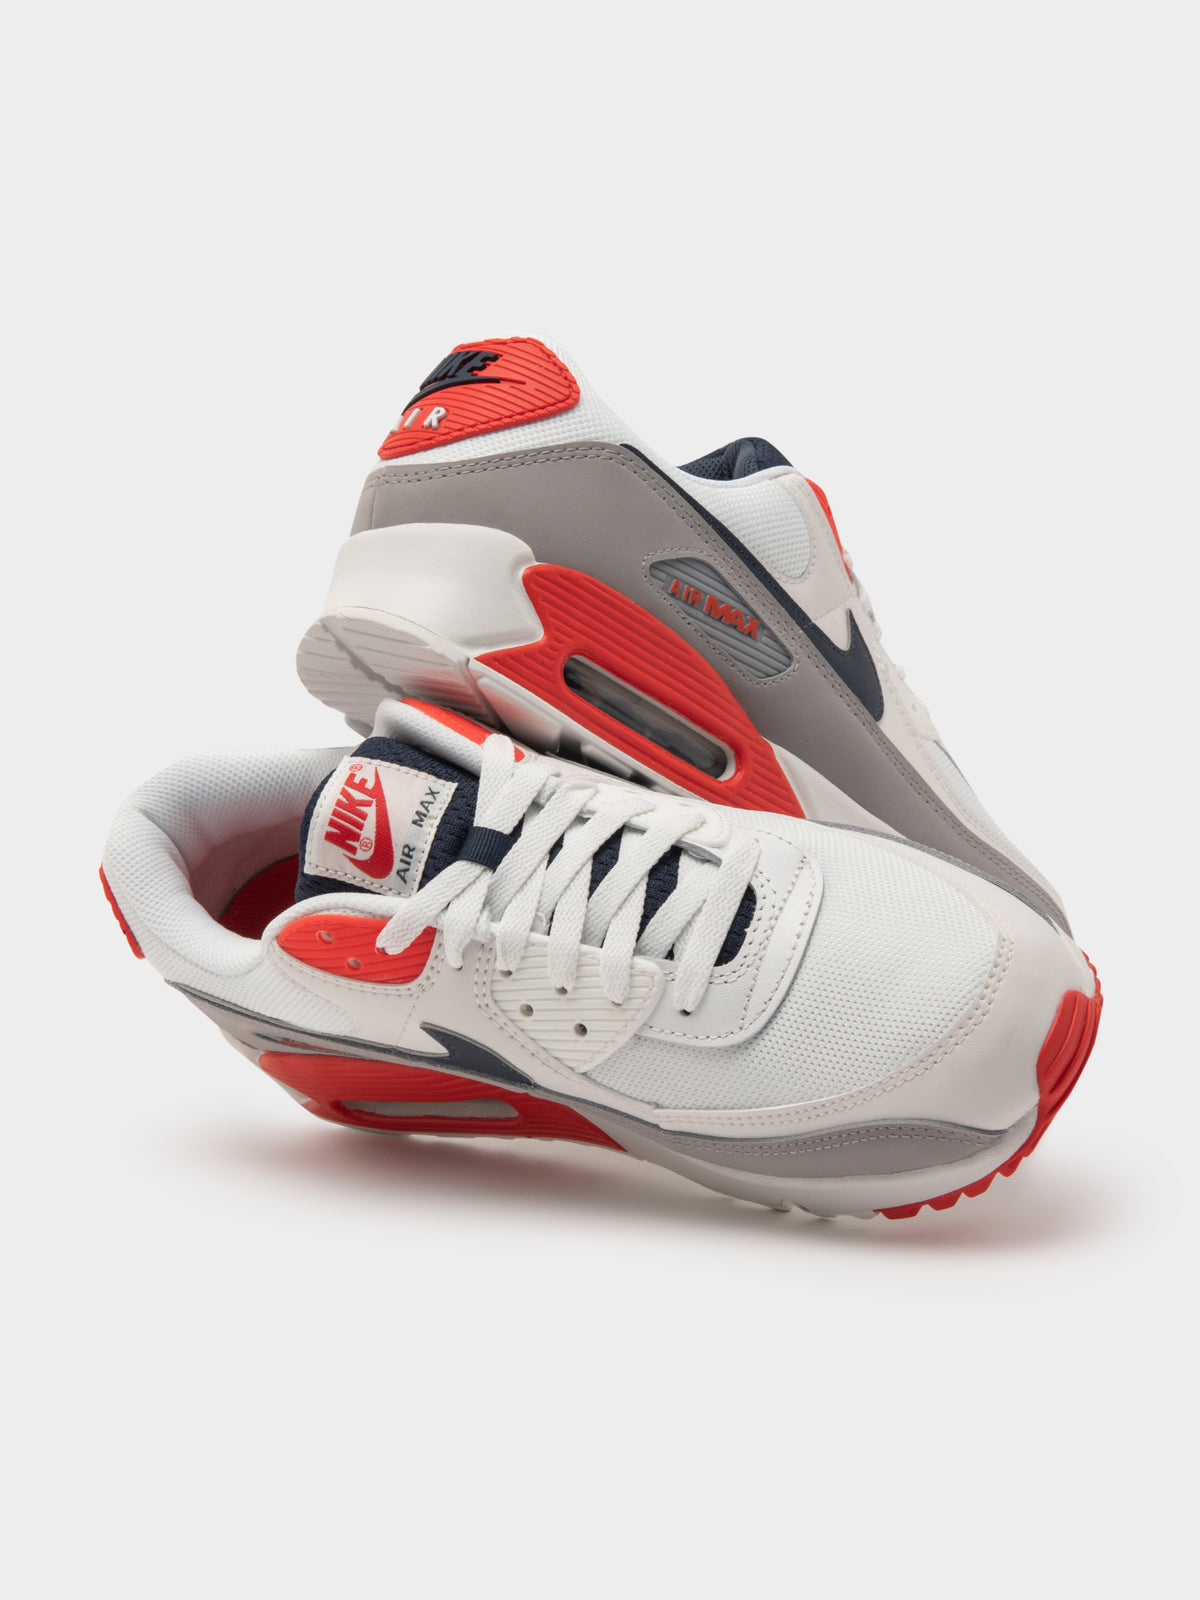 Mens Air Max 90 Sneakers in White Midnight Navy &amp; Red